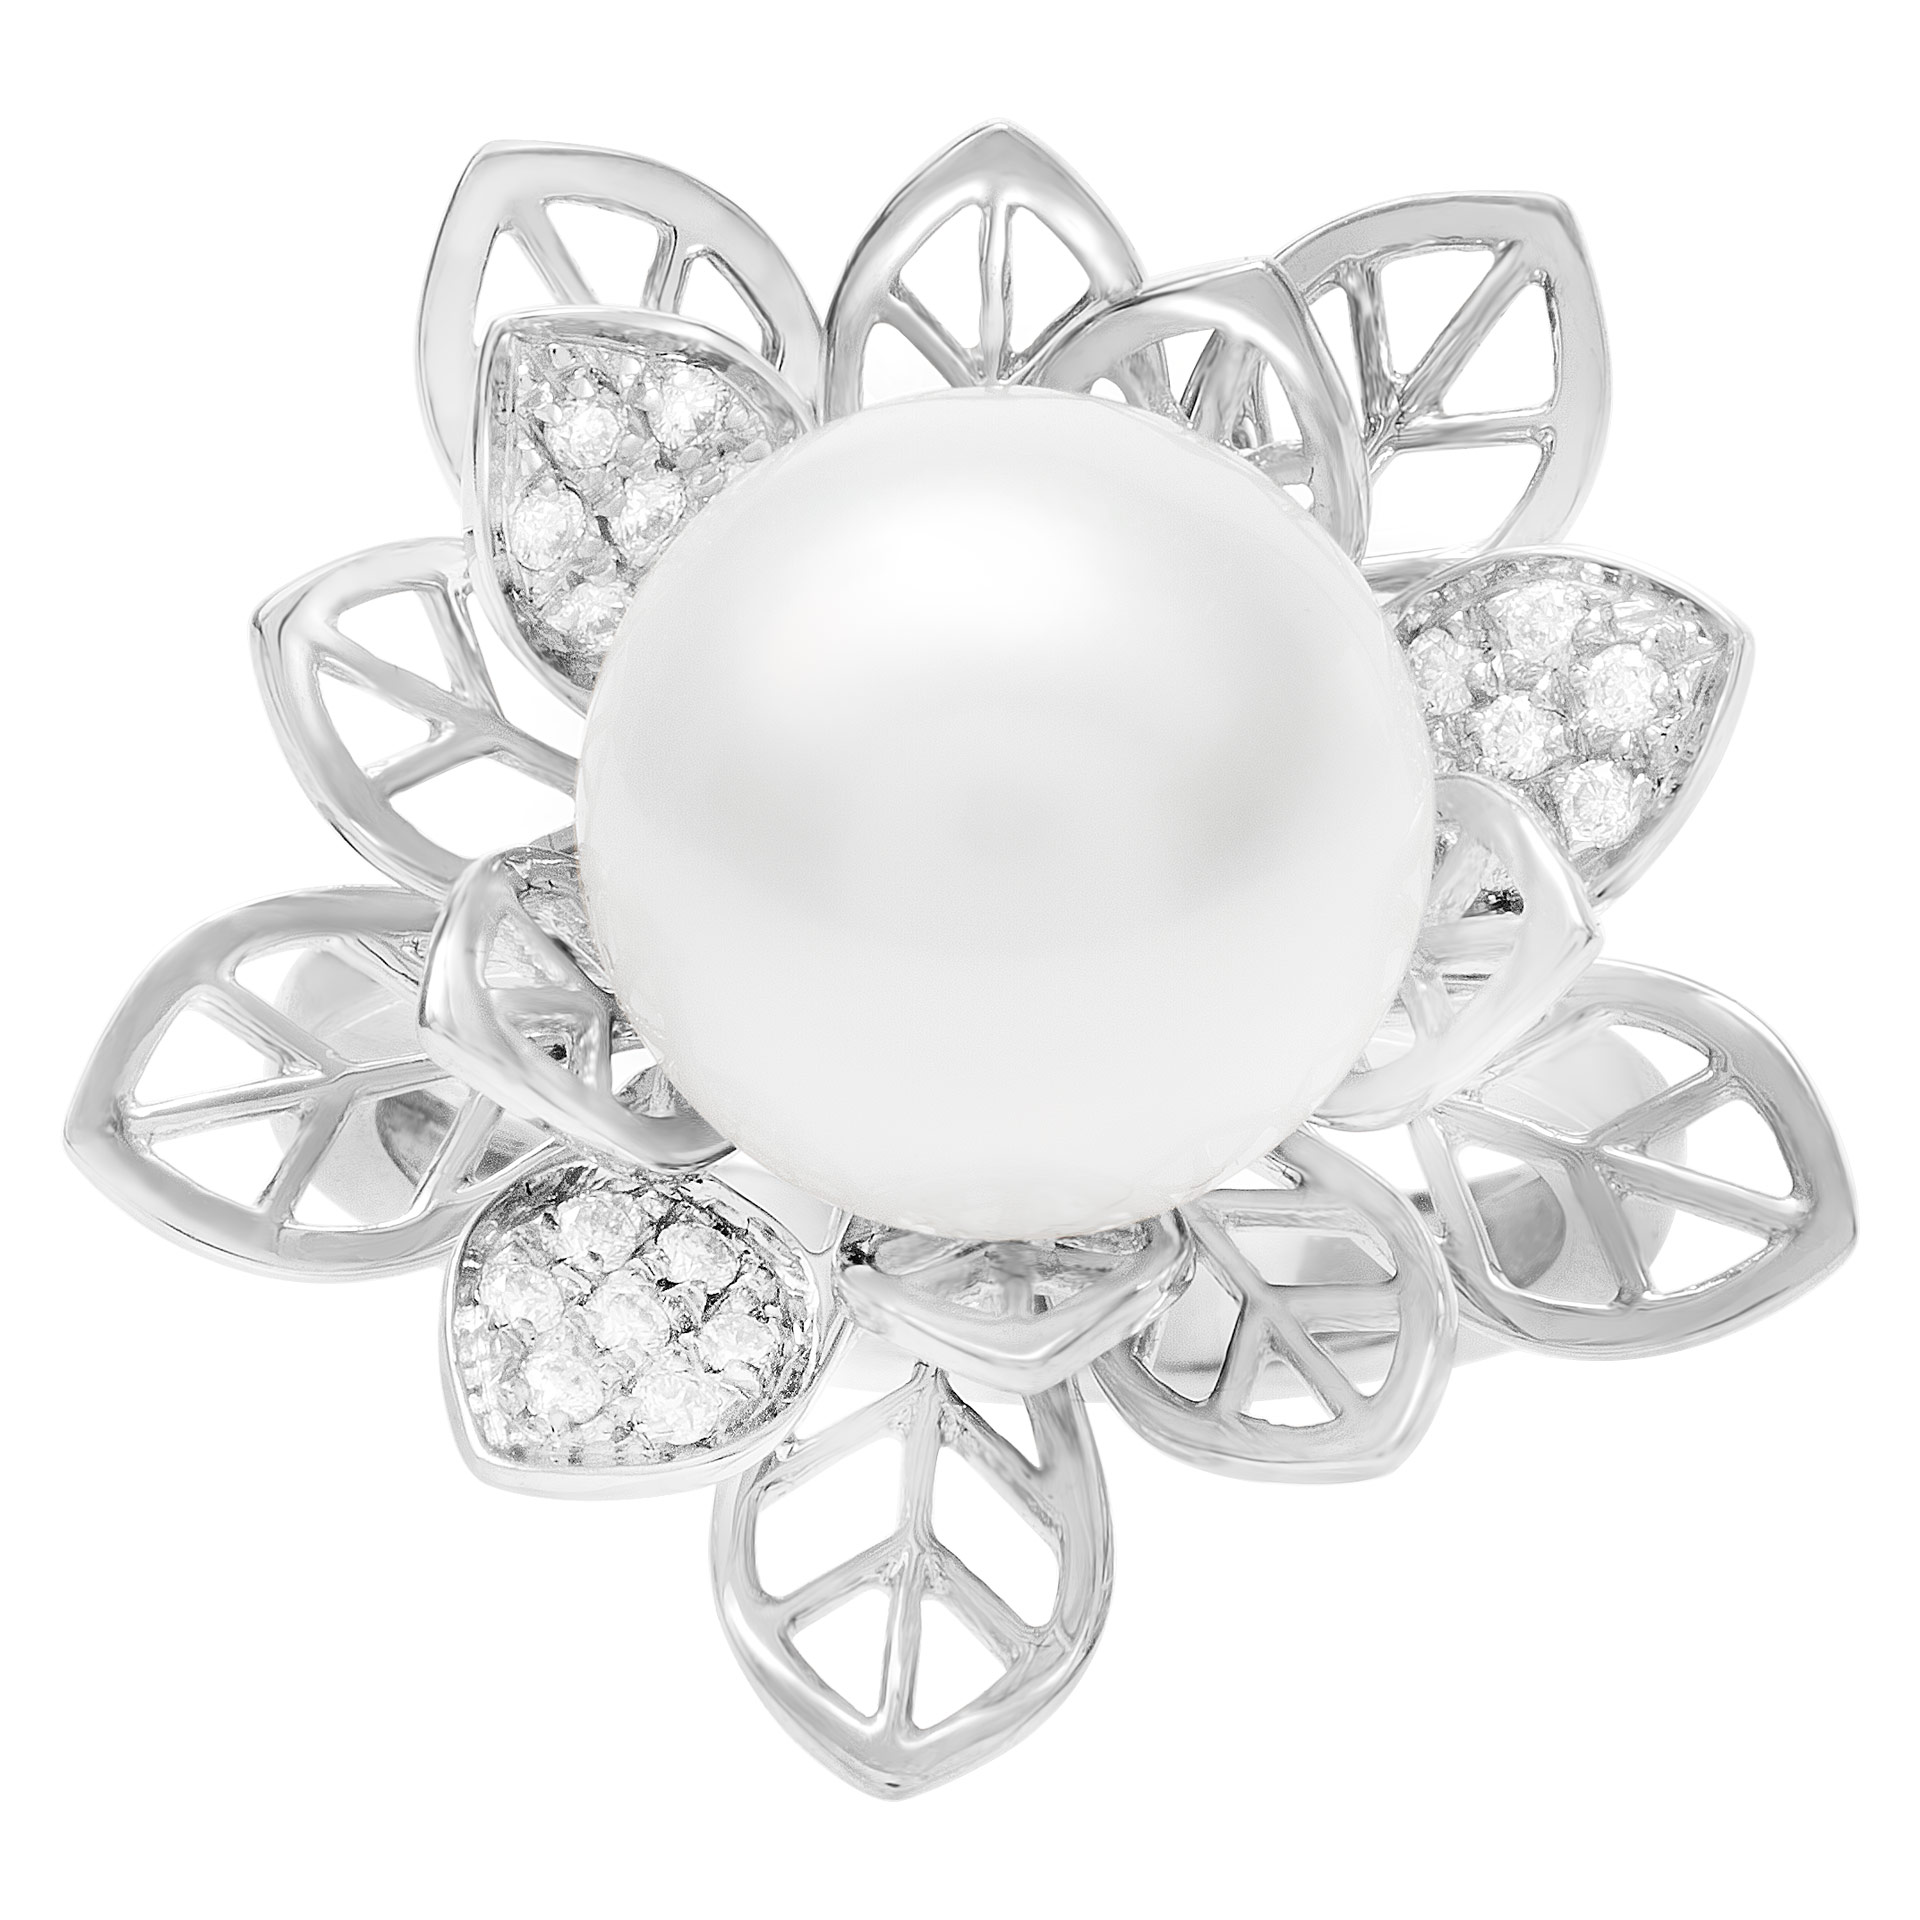 Diamond and pearl floral style ring in 18k white gold. 0.15 carat in diamonds image 1